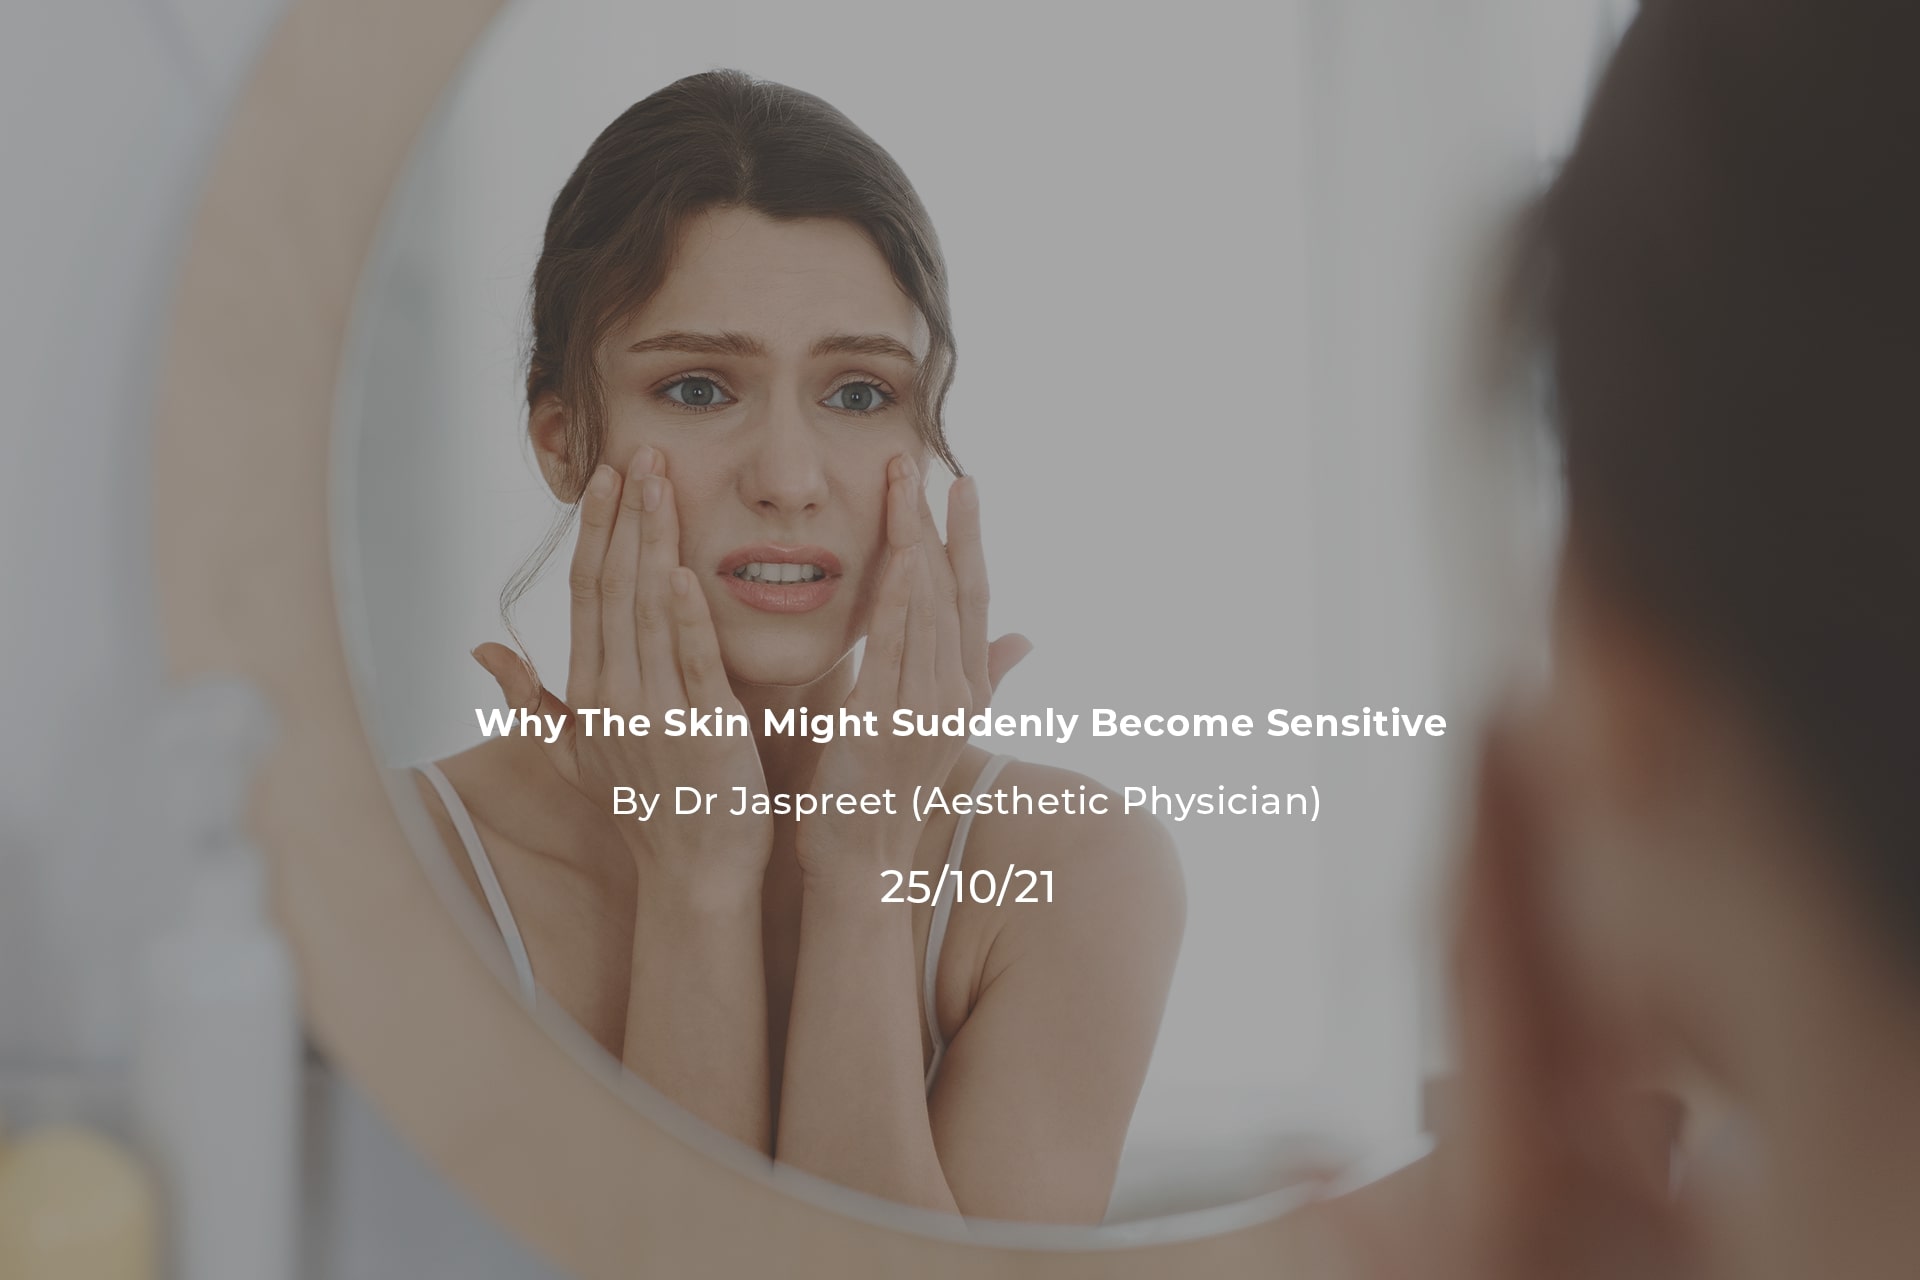 Why The Skin Might Suddenly Become Sensitive